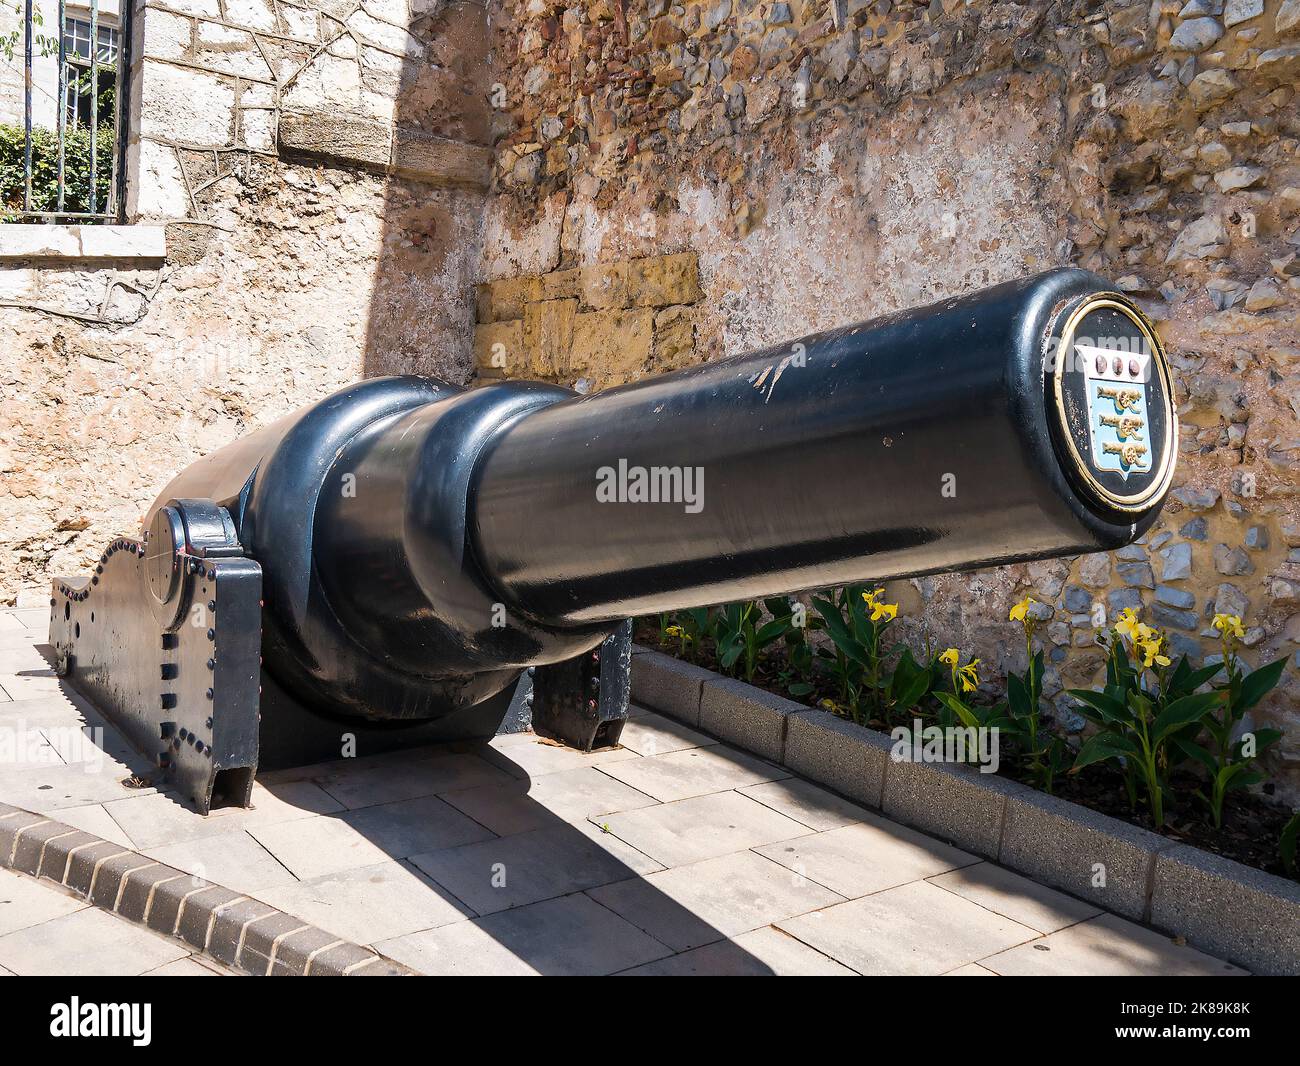 Artillery piece displaying a tampion with the Coat of Arms of the Royal Army Ordnance Corps is the 10-inch 18 ton gun at South Port Gate Gibraltar Stock Photo